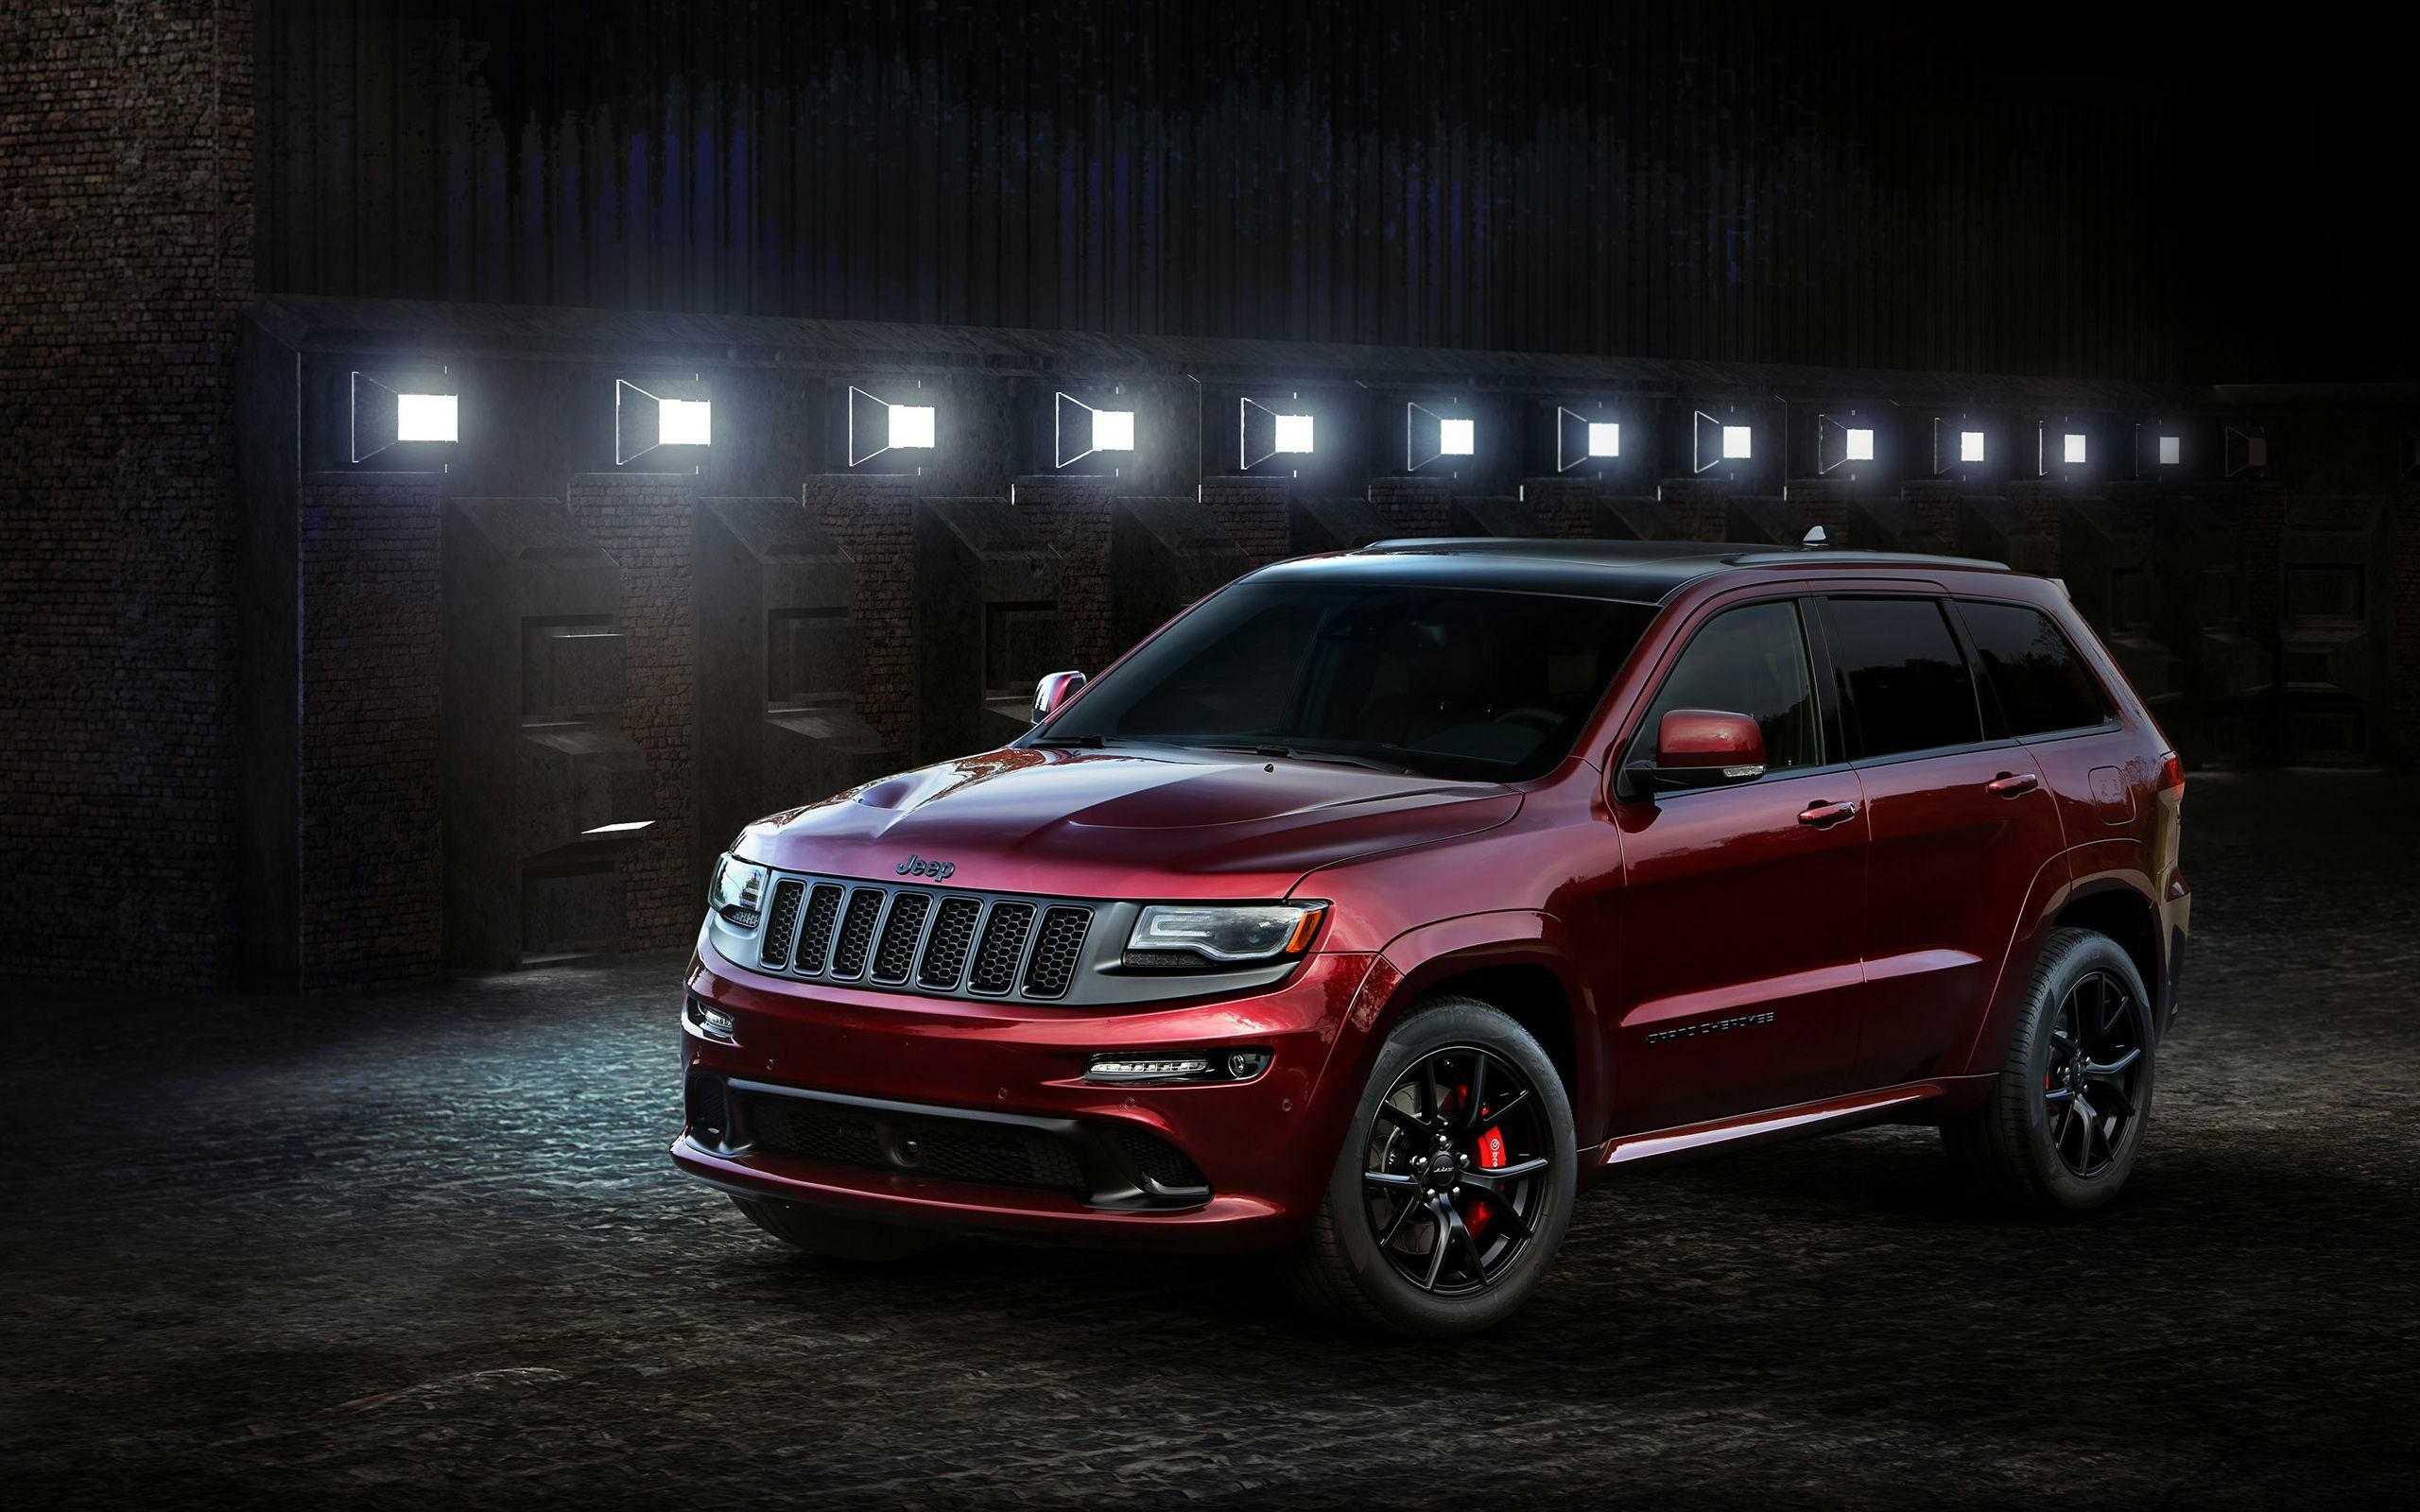 Jeep Grand Cherokee: A range of mid-size SUVs produced by the American manufacturer. 2560x1600 HD Background.